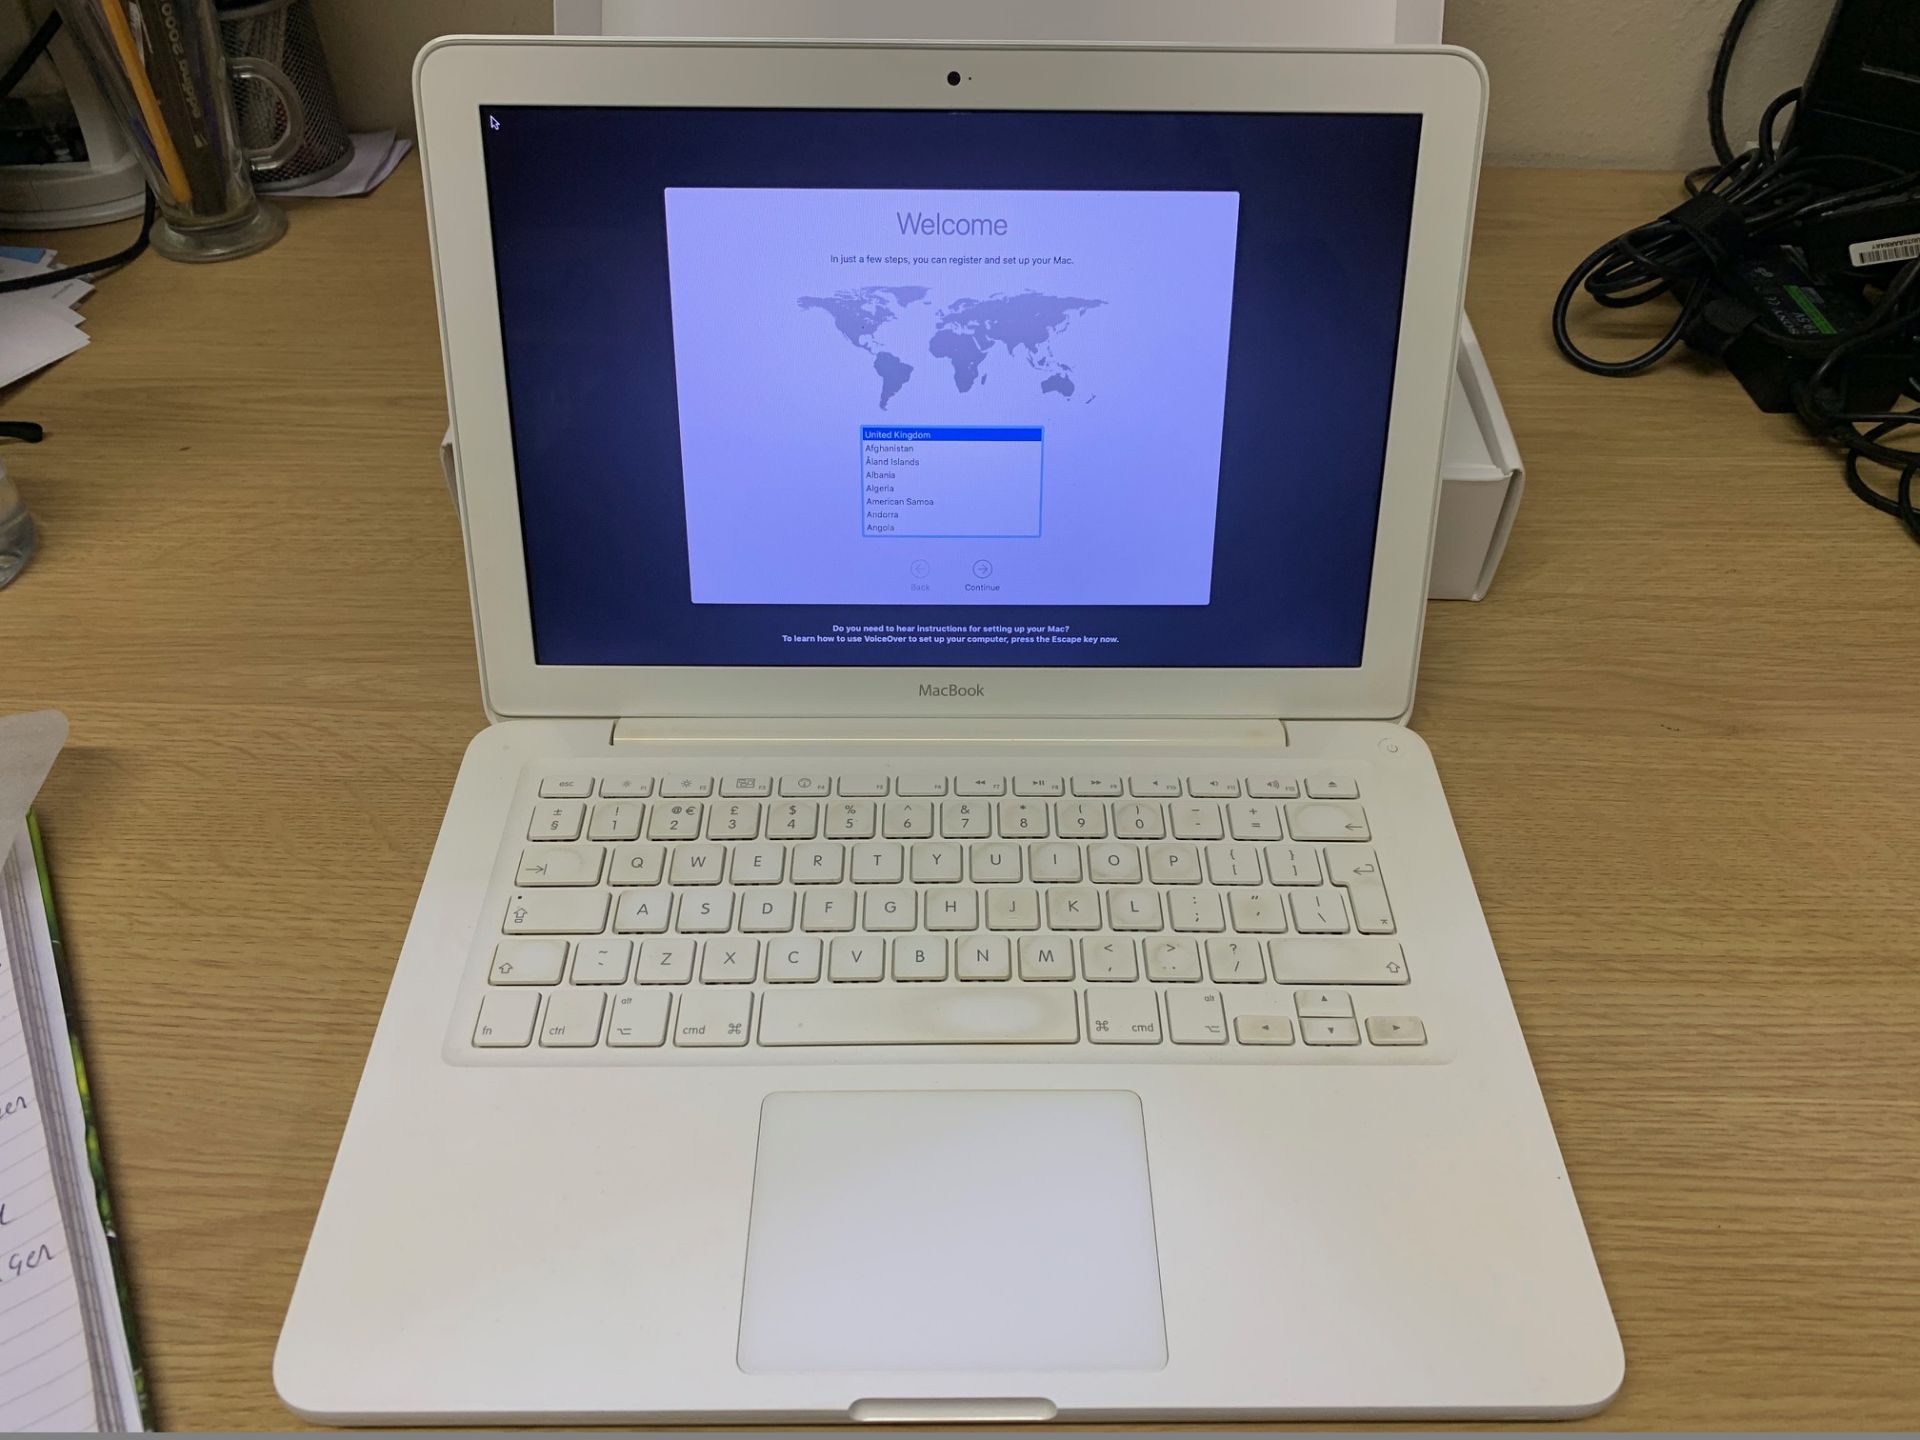 Apple MacBook - Model A1342, 2.4GHz, 250GB Hard Drive, Includes Box & Charger